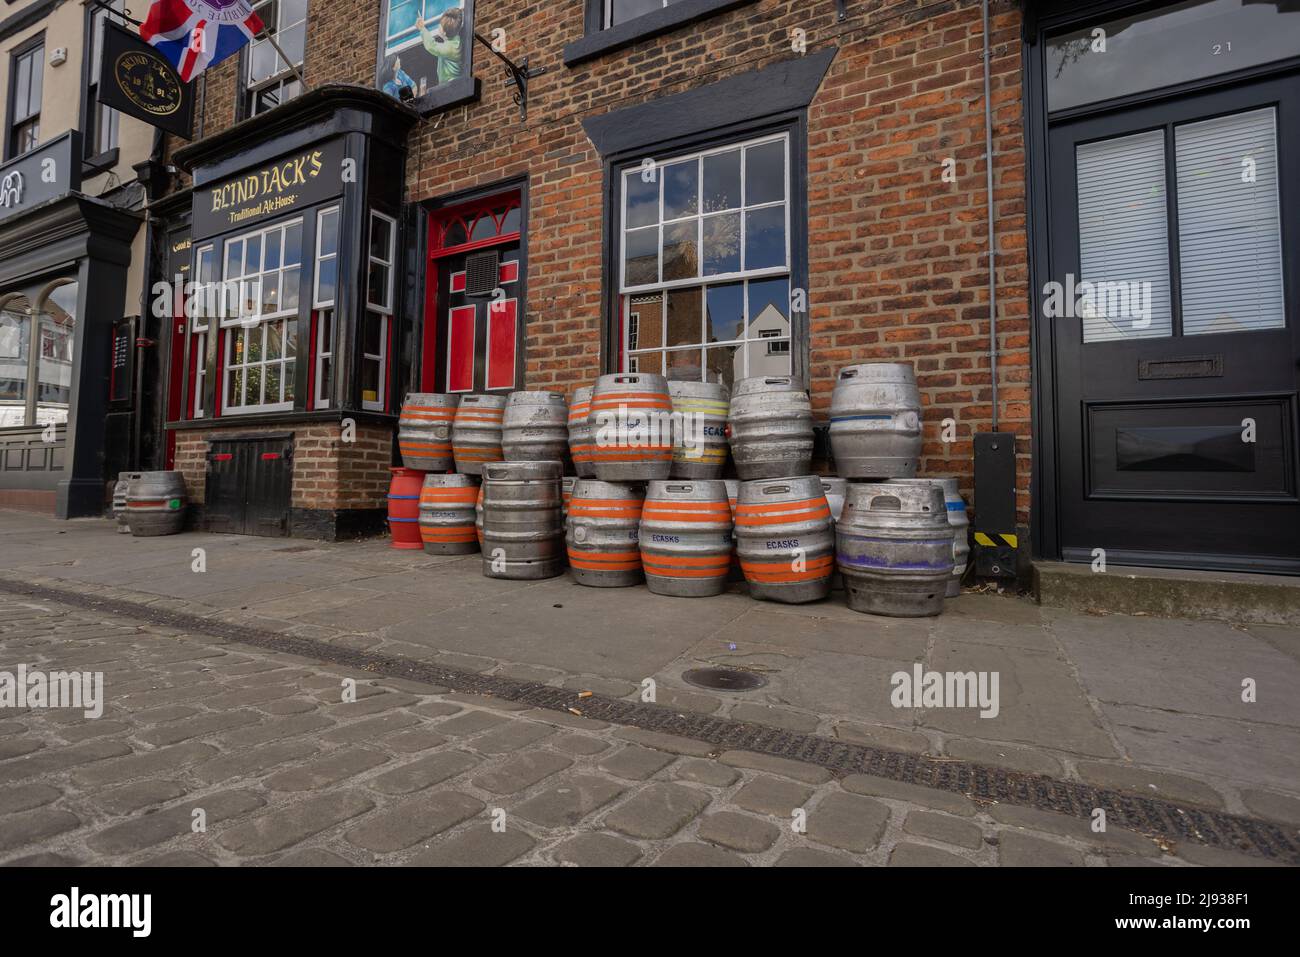 Low angle view of kegs with colourful locators outside Blind Jack's Traditional Ale House in Knaresborough North Yorkshire named after Jack Metcalf t Stock Photo